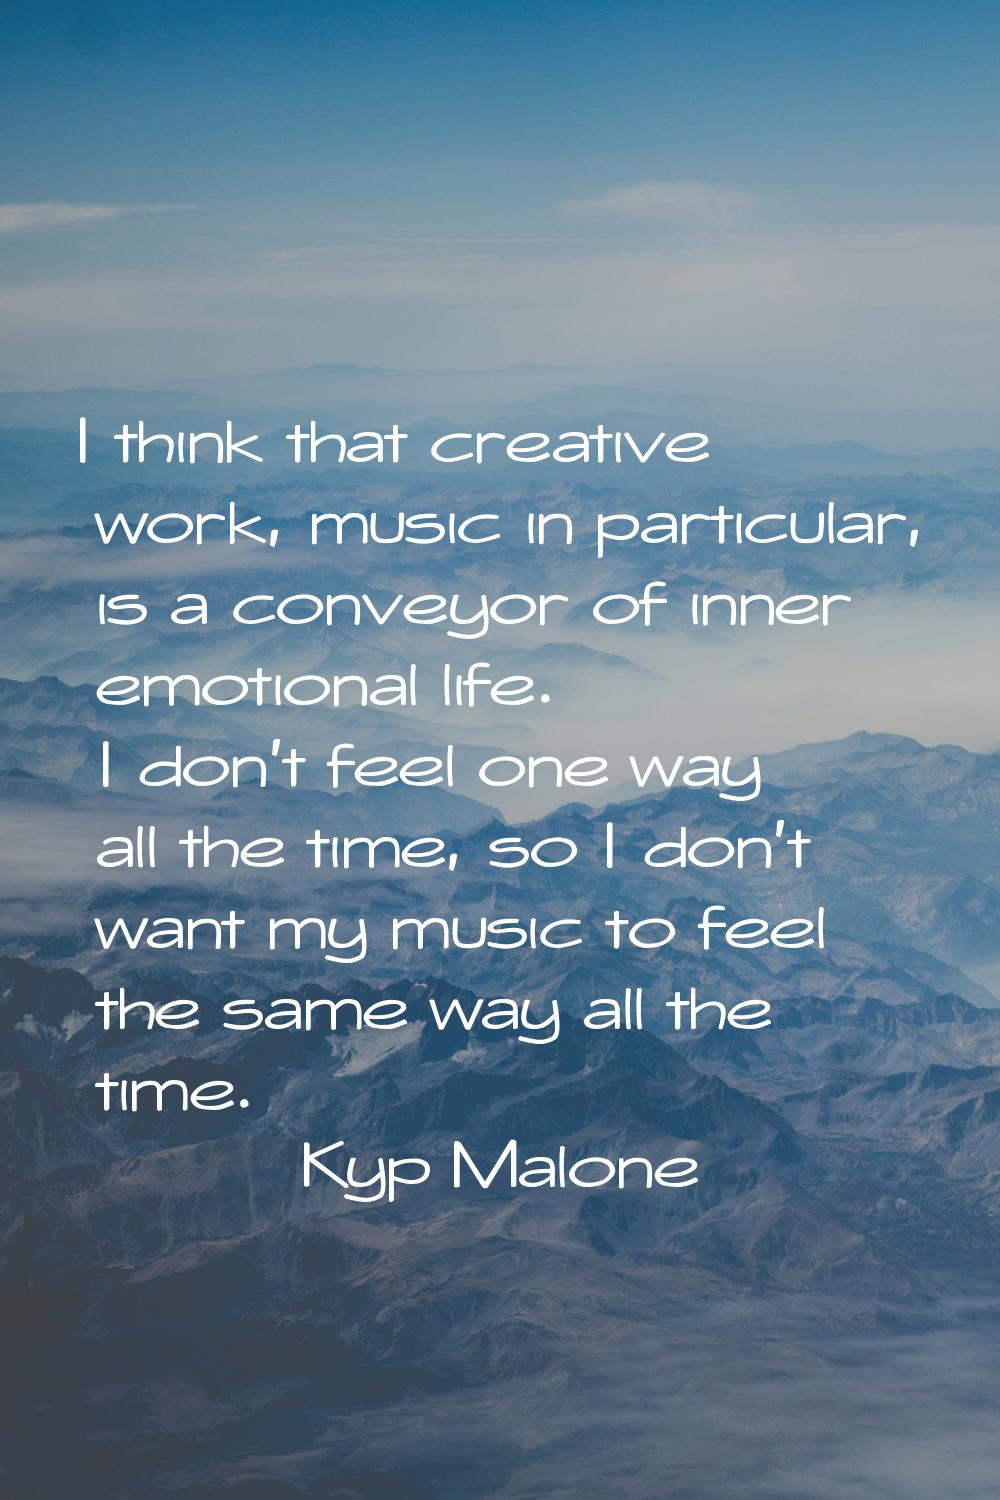 I think that creative work, music in particular, is a conveyor of inner emotional life. I don't fee